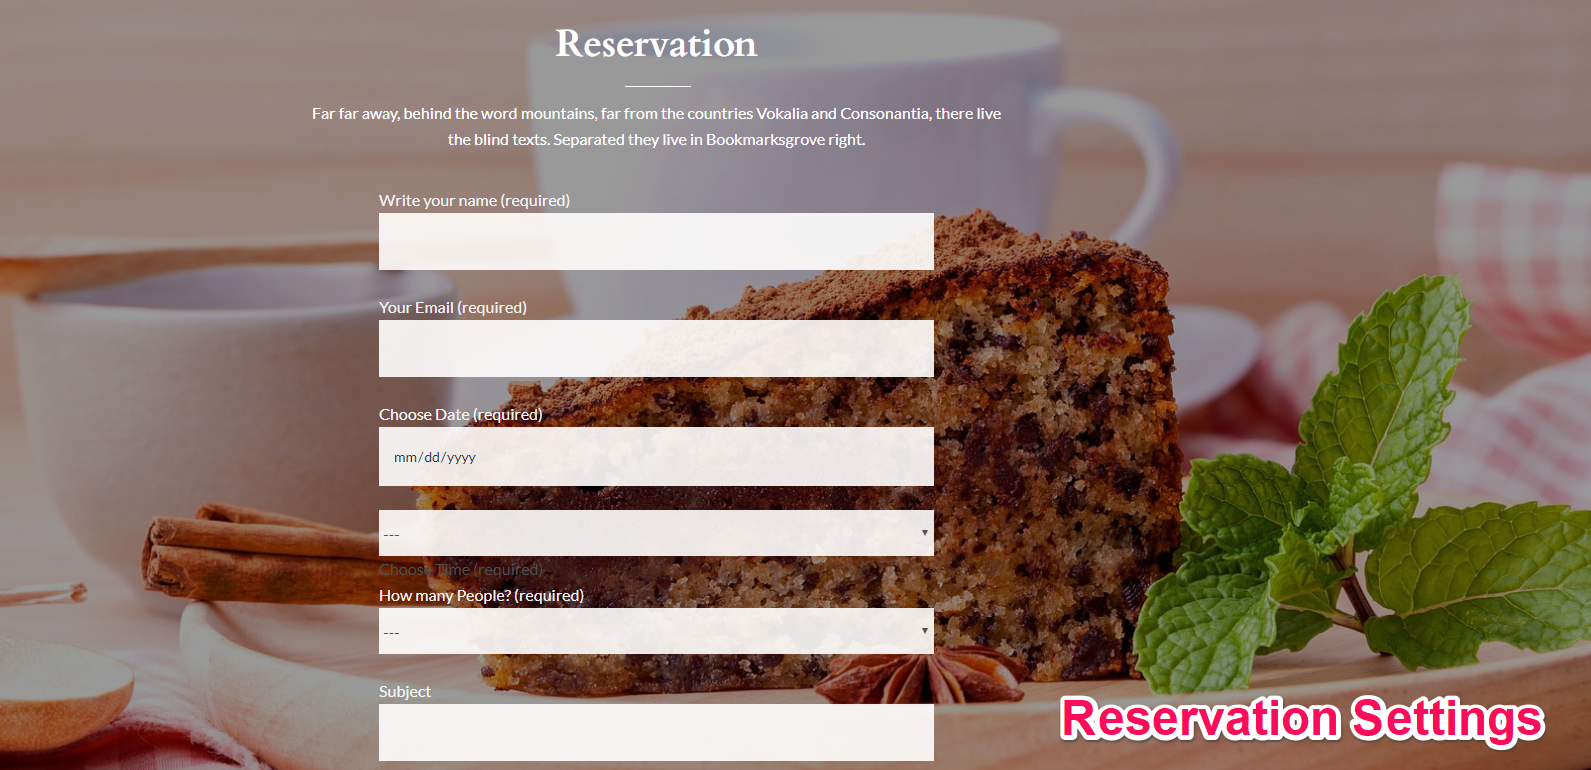 reservation settings